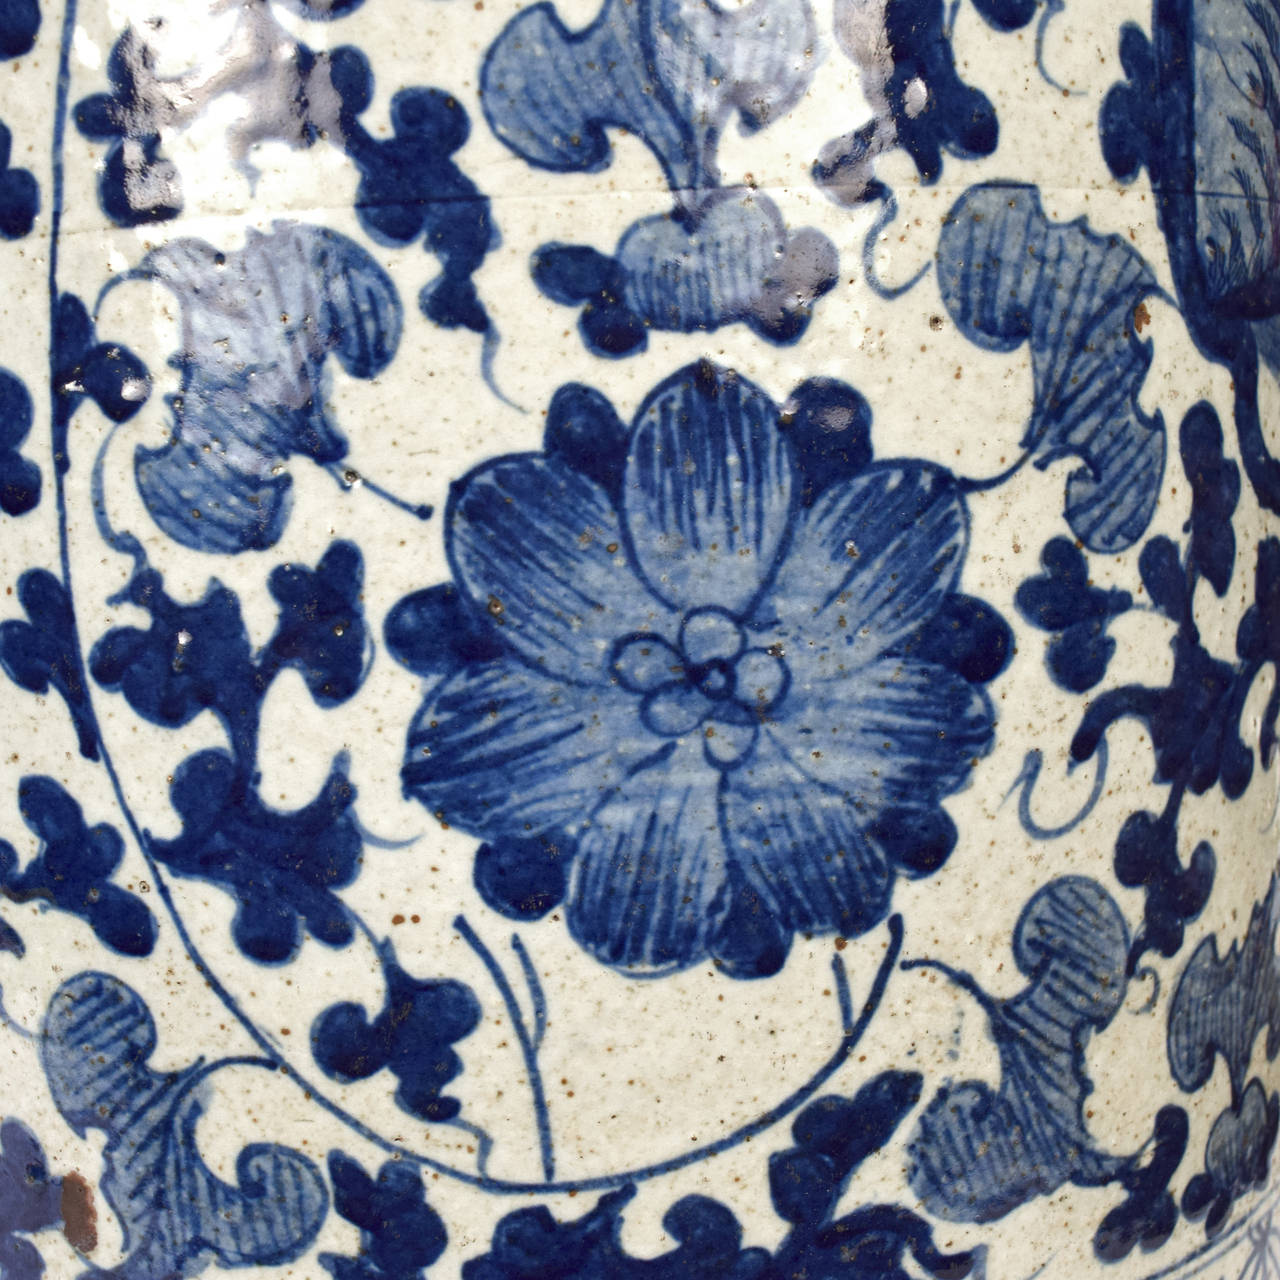 Ceramic Chinese Blue and White Umbrella Containers